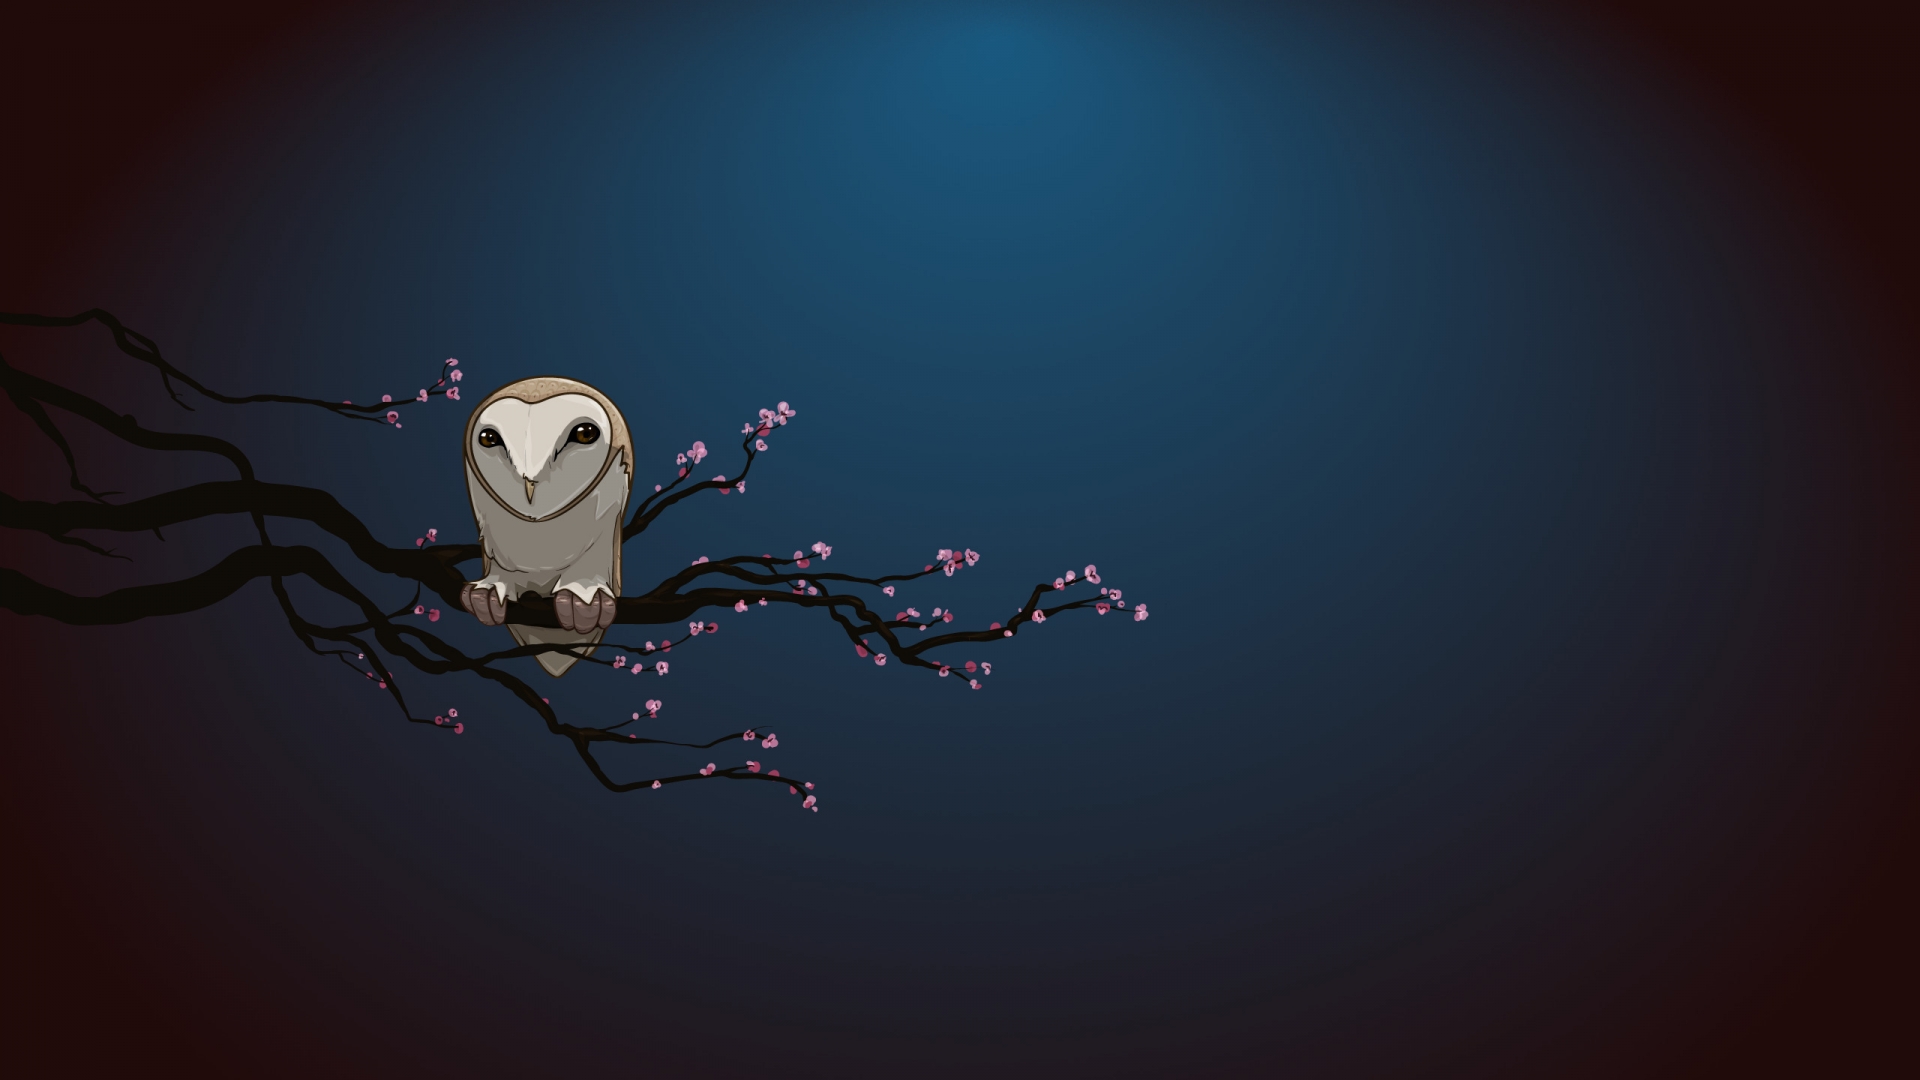 Owl Alone for 1920 x 1080 HDTV 1080p resolution